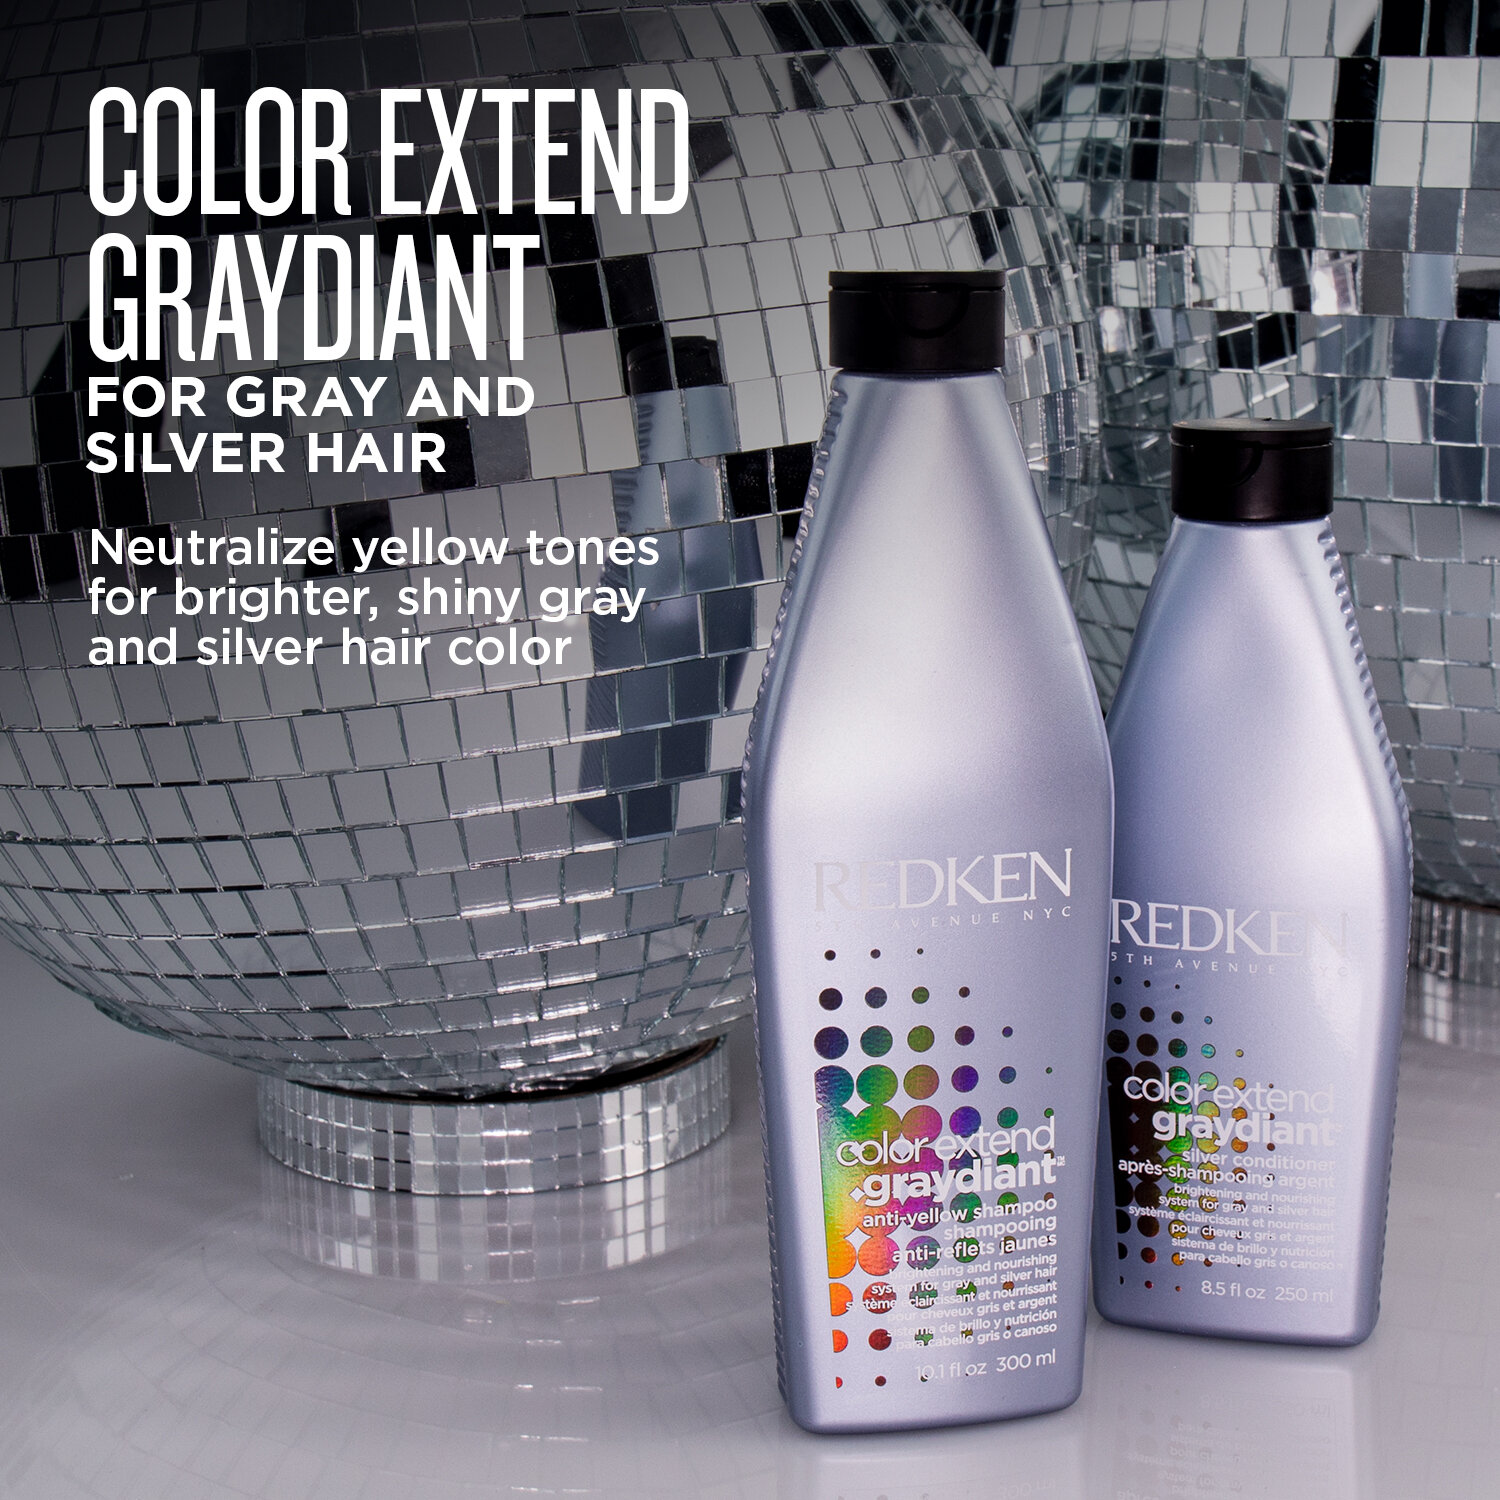 Redken-2020-US-Amazon-Color-Care-Page-Product-Title-Banner-Graydiant-1500x1500.jpg